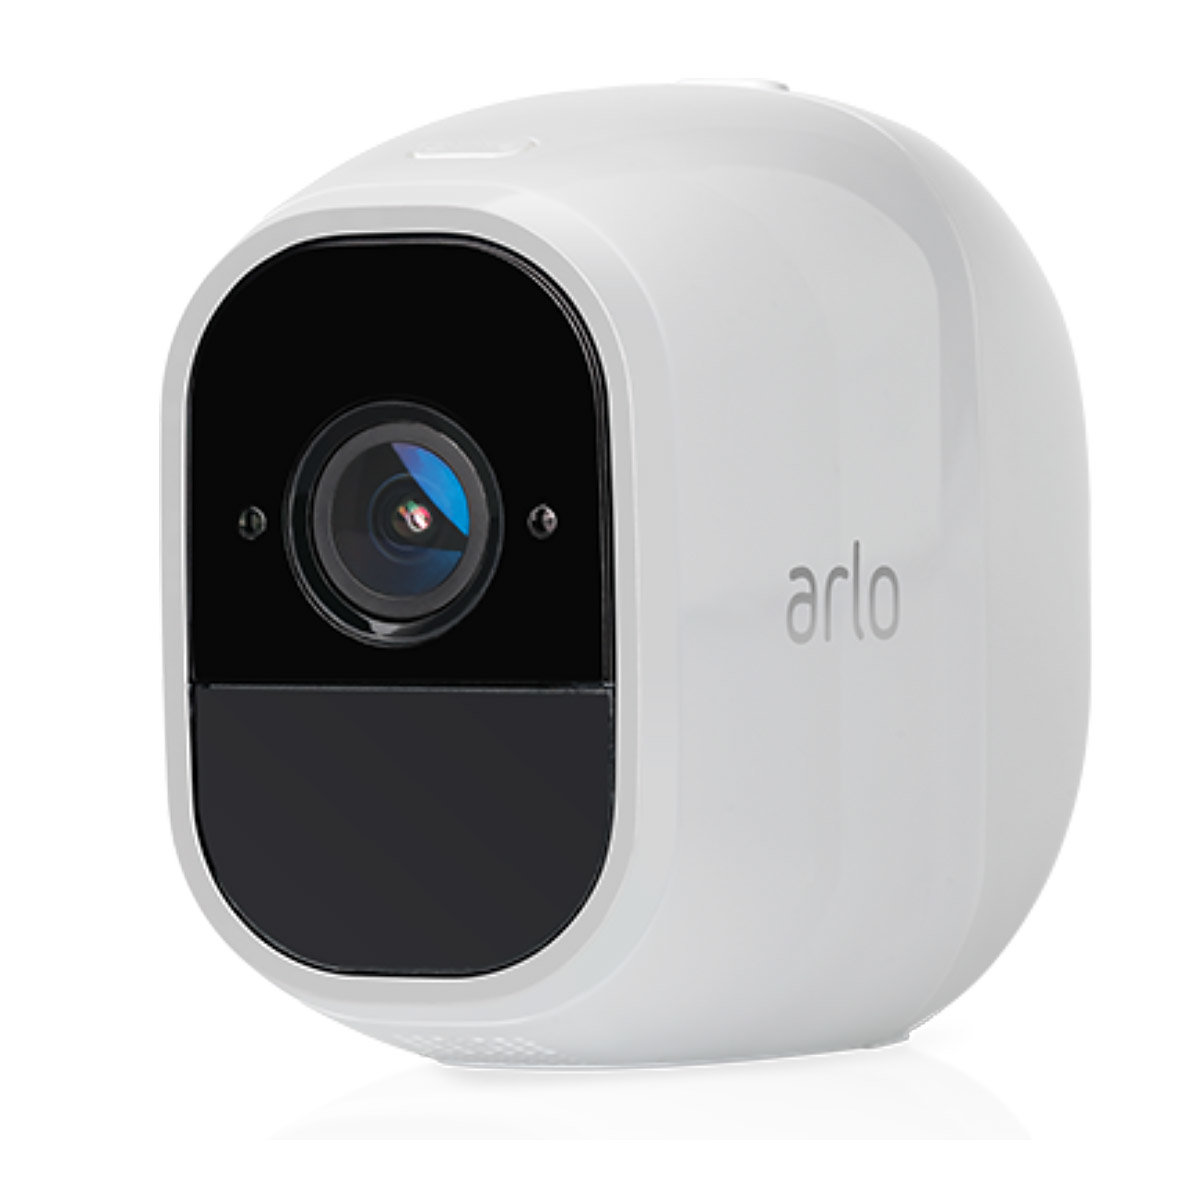 Arlo Pro 2 1080p Full HD Wireless Security System with 3 Cameras VMS4330P100AUS 606449128475 eBay